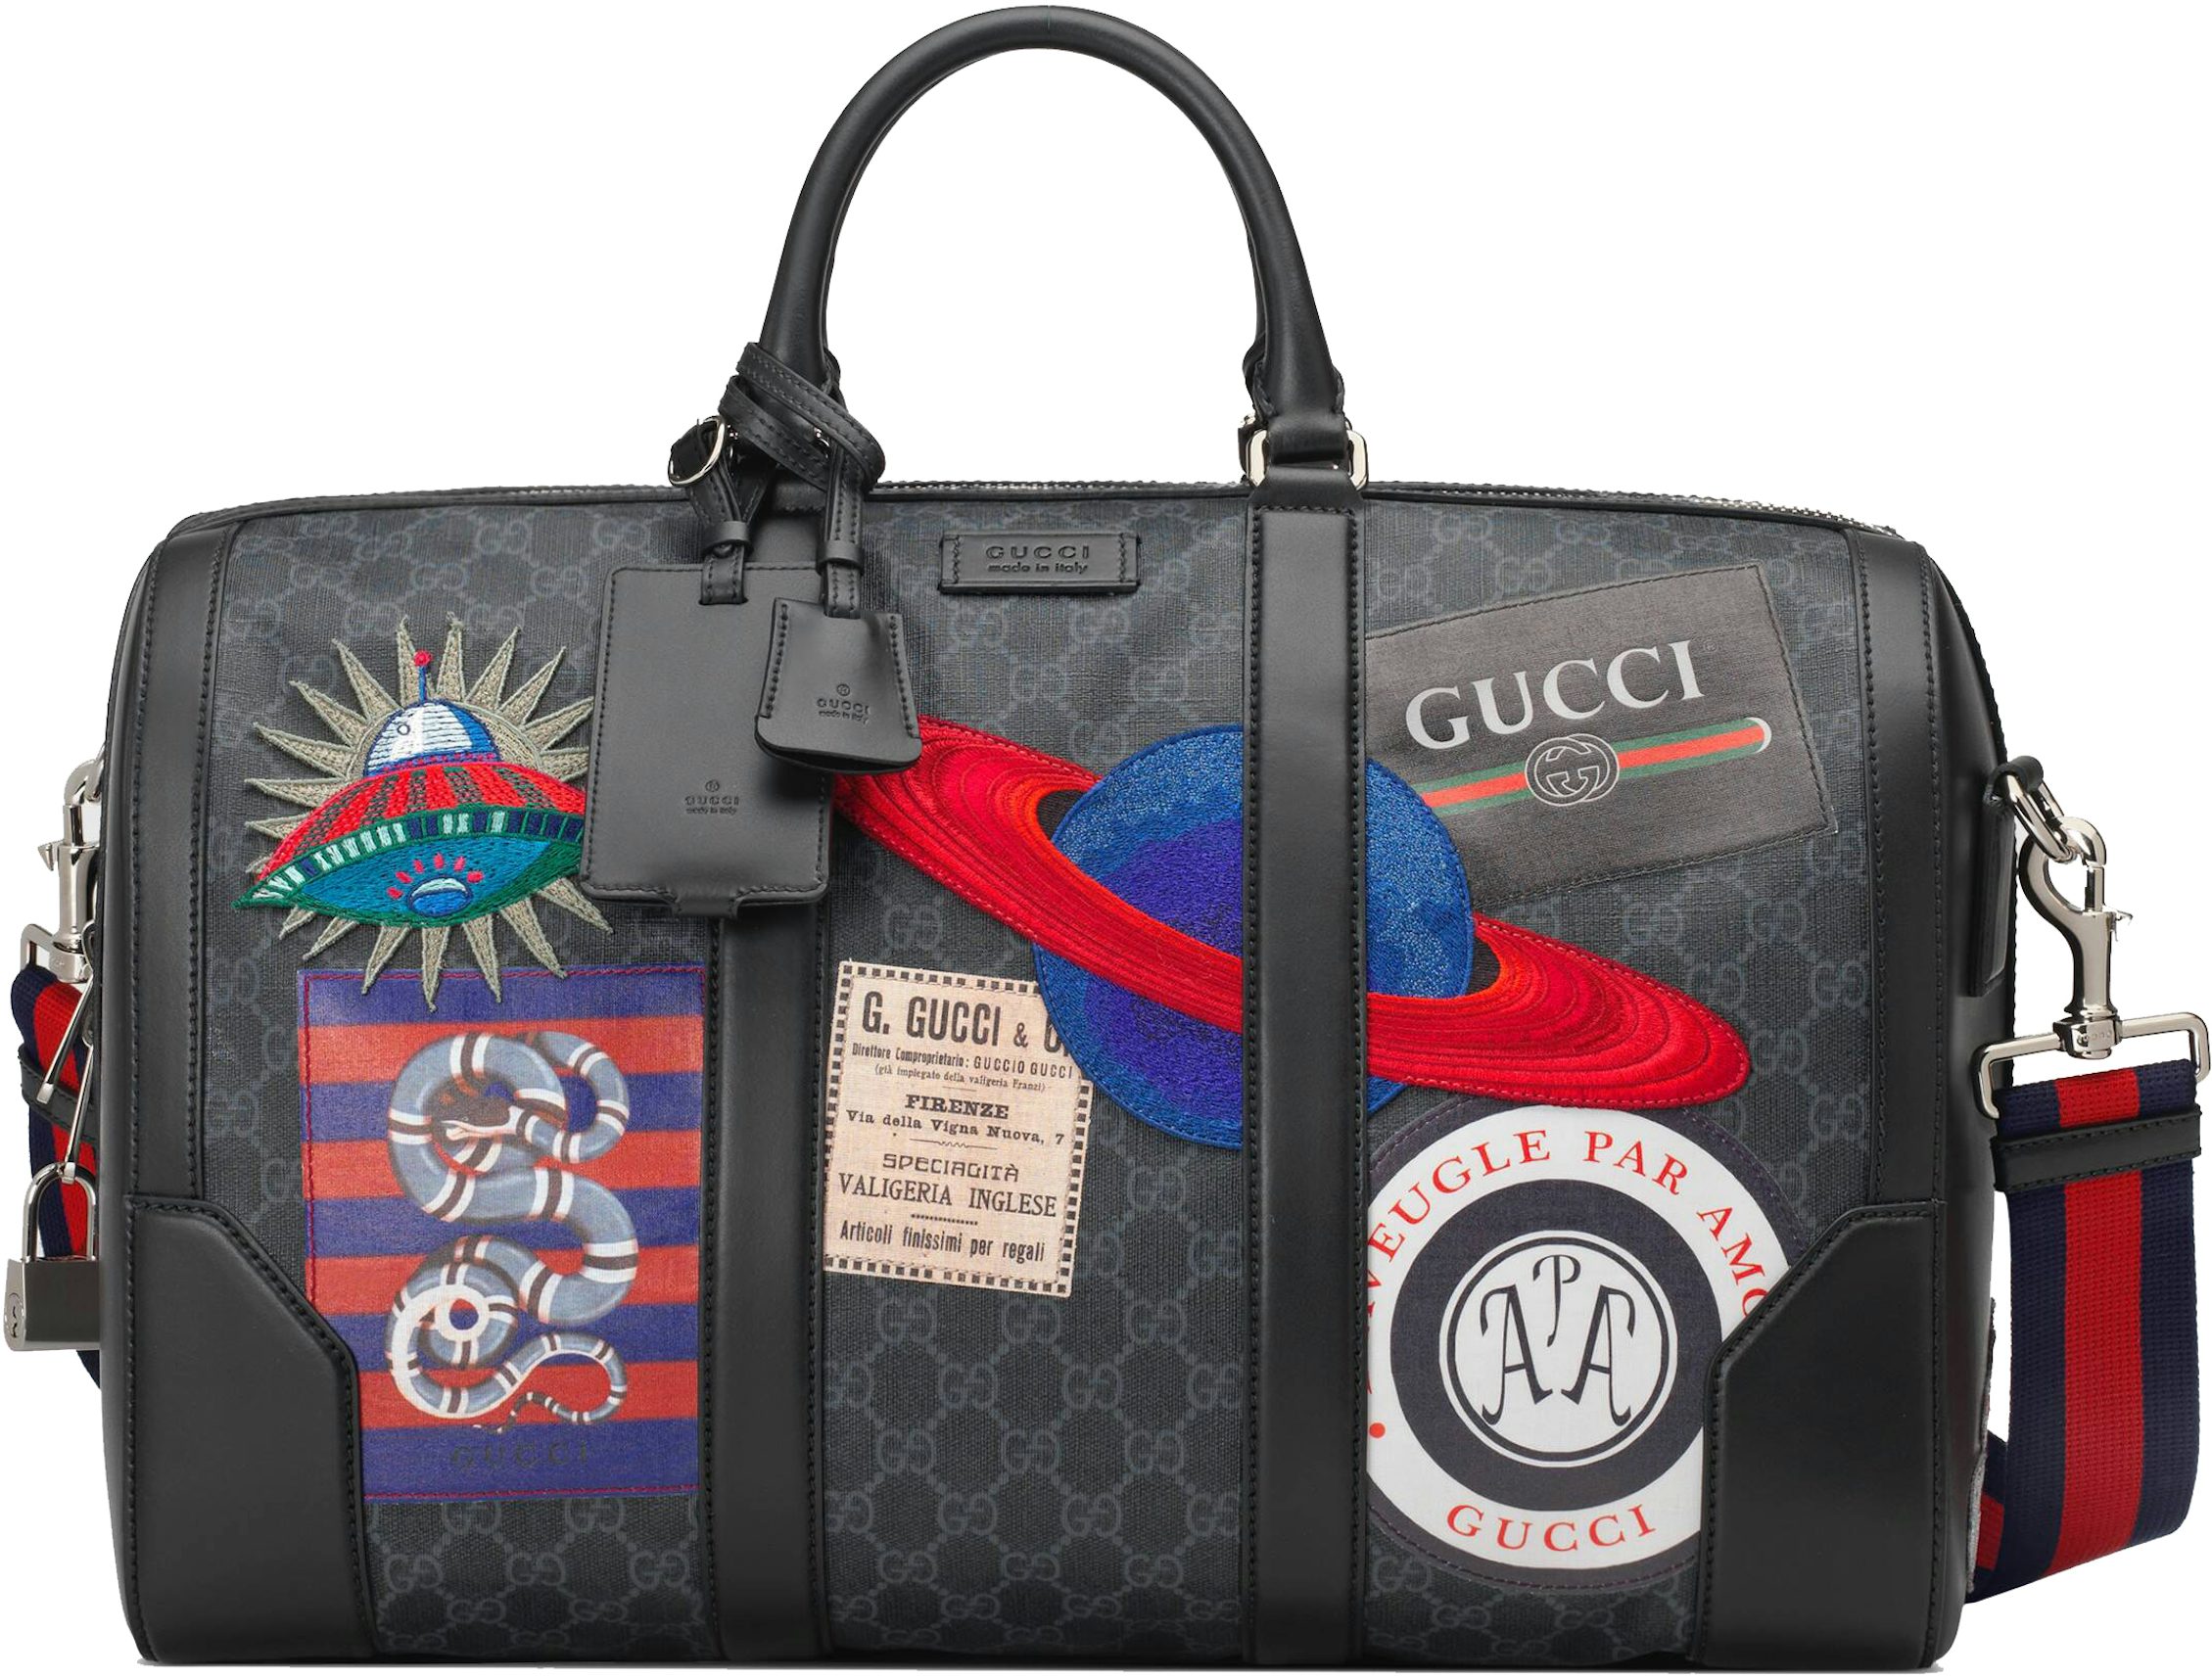 Gucci Night Courrier Carry-On Duffle Soft GG Supreme Black/Grey